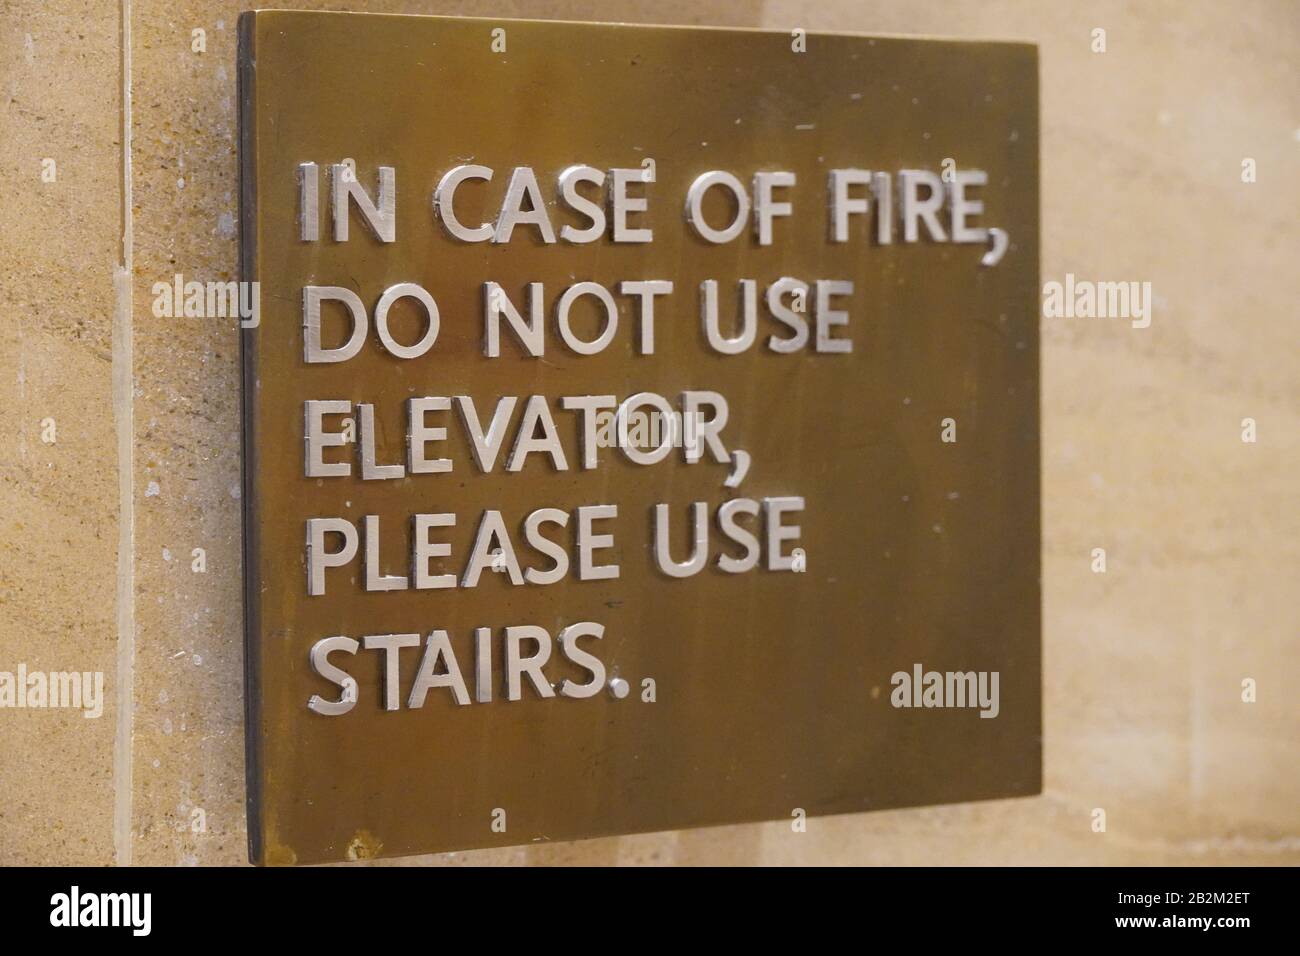 A sign that says, In Case Of Fire, Do Not Use Elevator, Please Use Stairs, which direct people of what to do in case of an fire emergency. Stock Photo